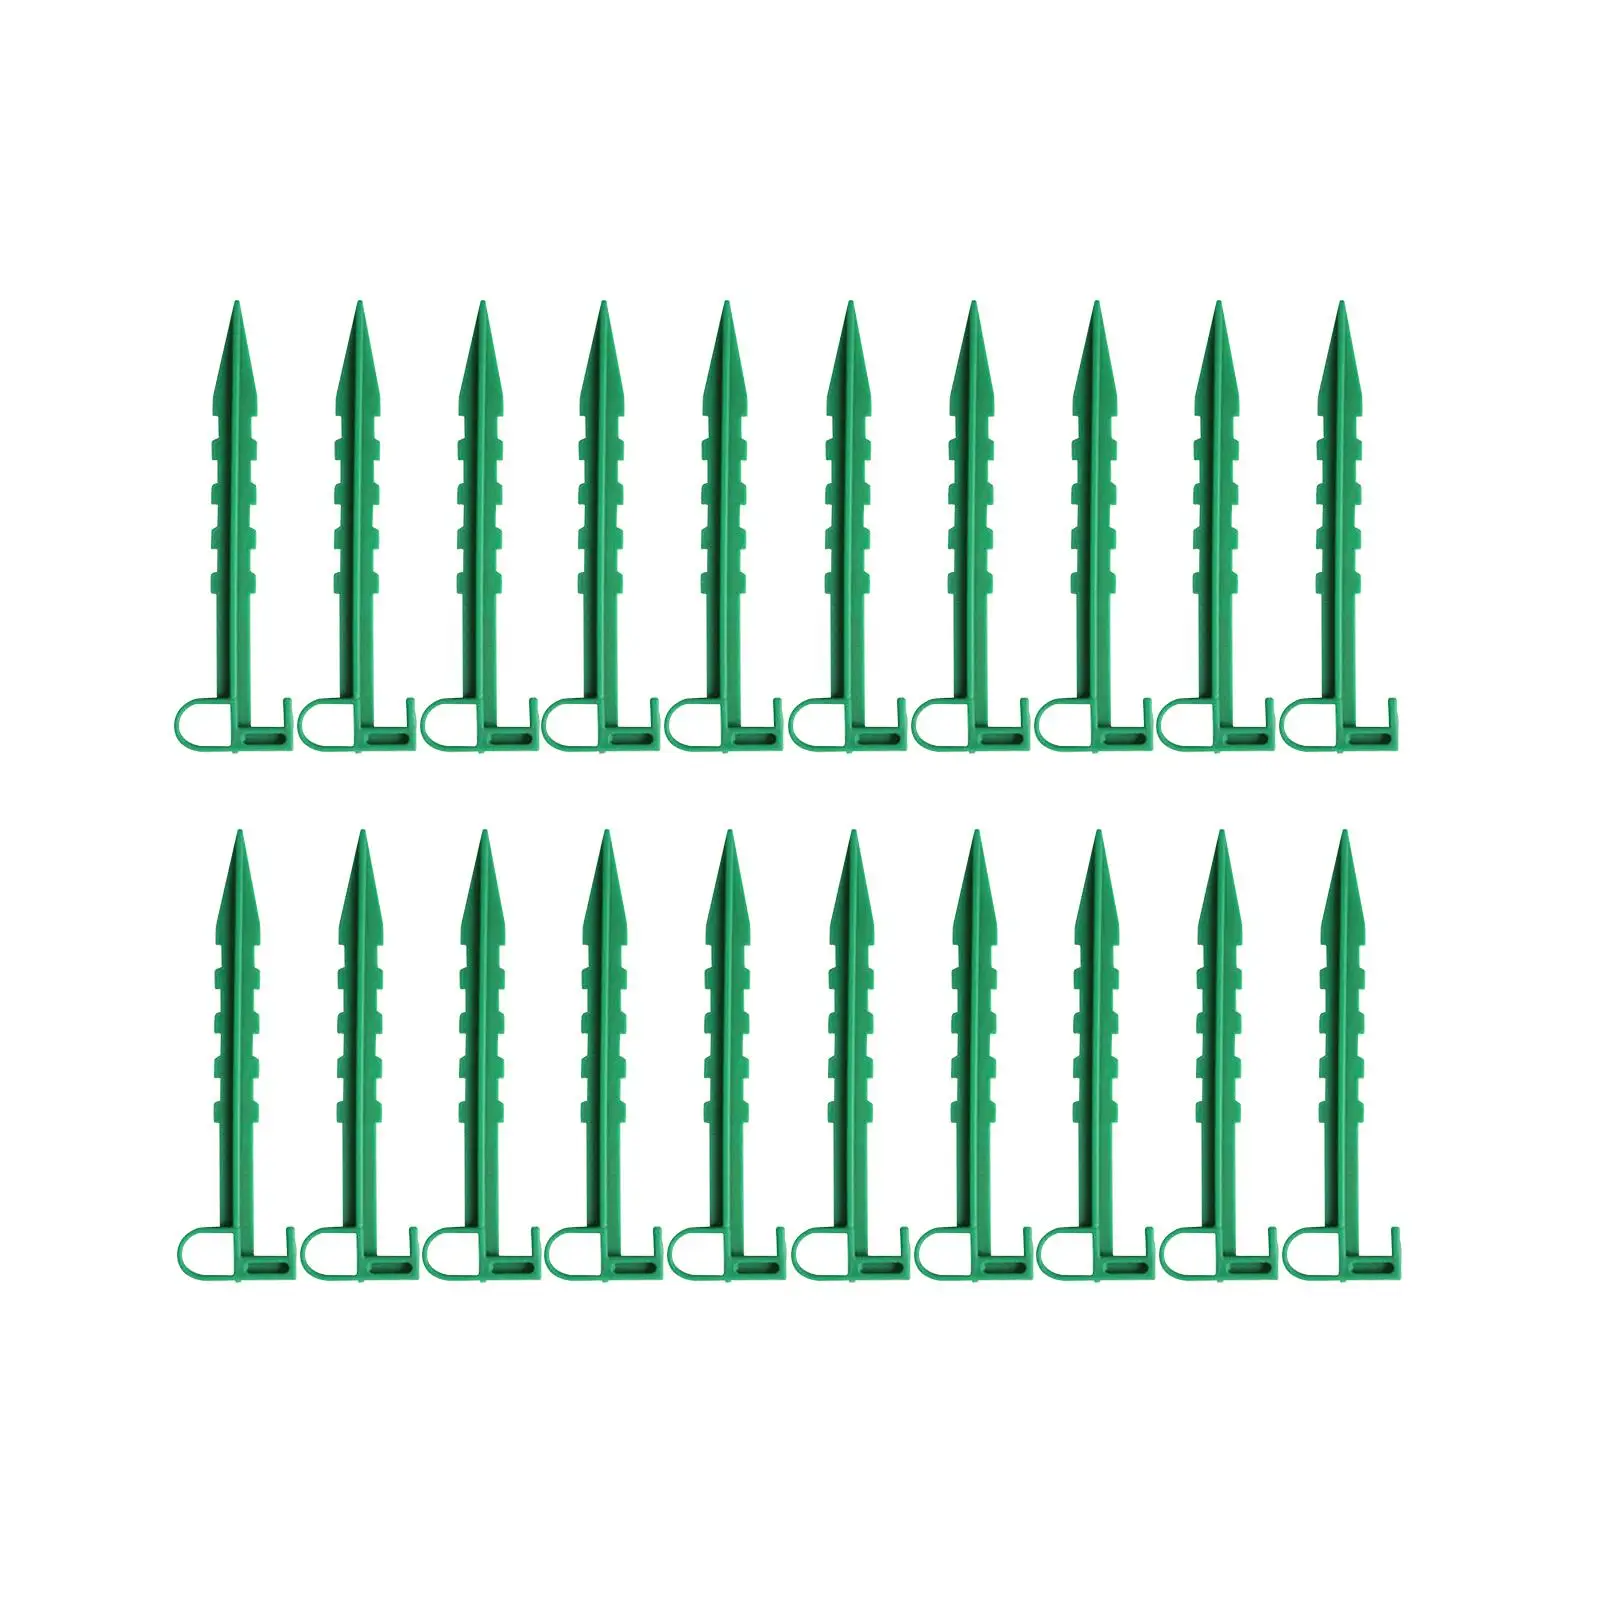 20x Garden Stakes Tarp Stakes Durable Fixed Fences Landscape Stakes for Holding Down Tents Camping Greenhouse Fabric Lawn Edging